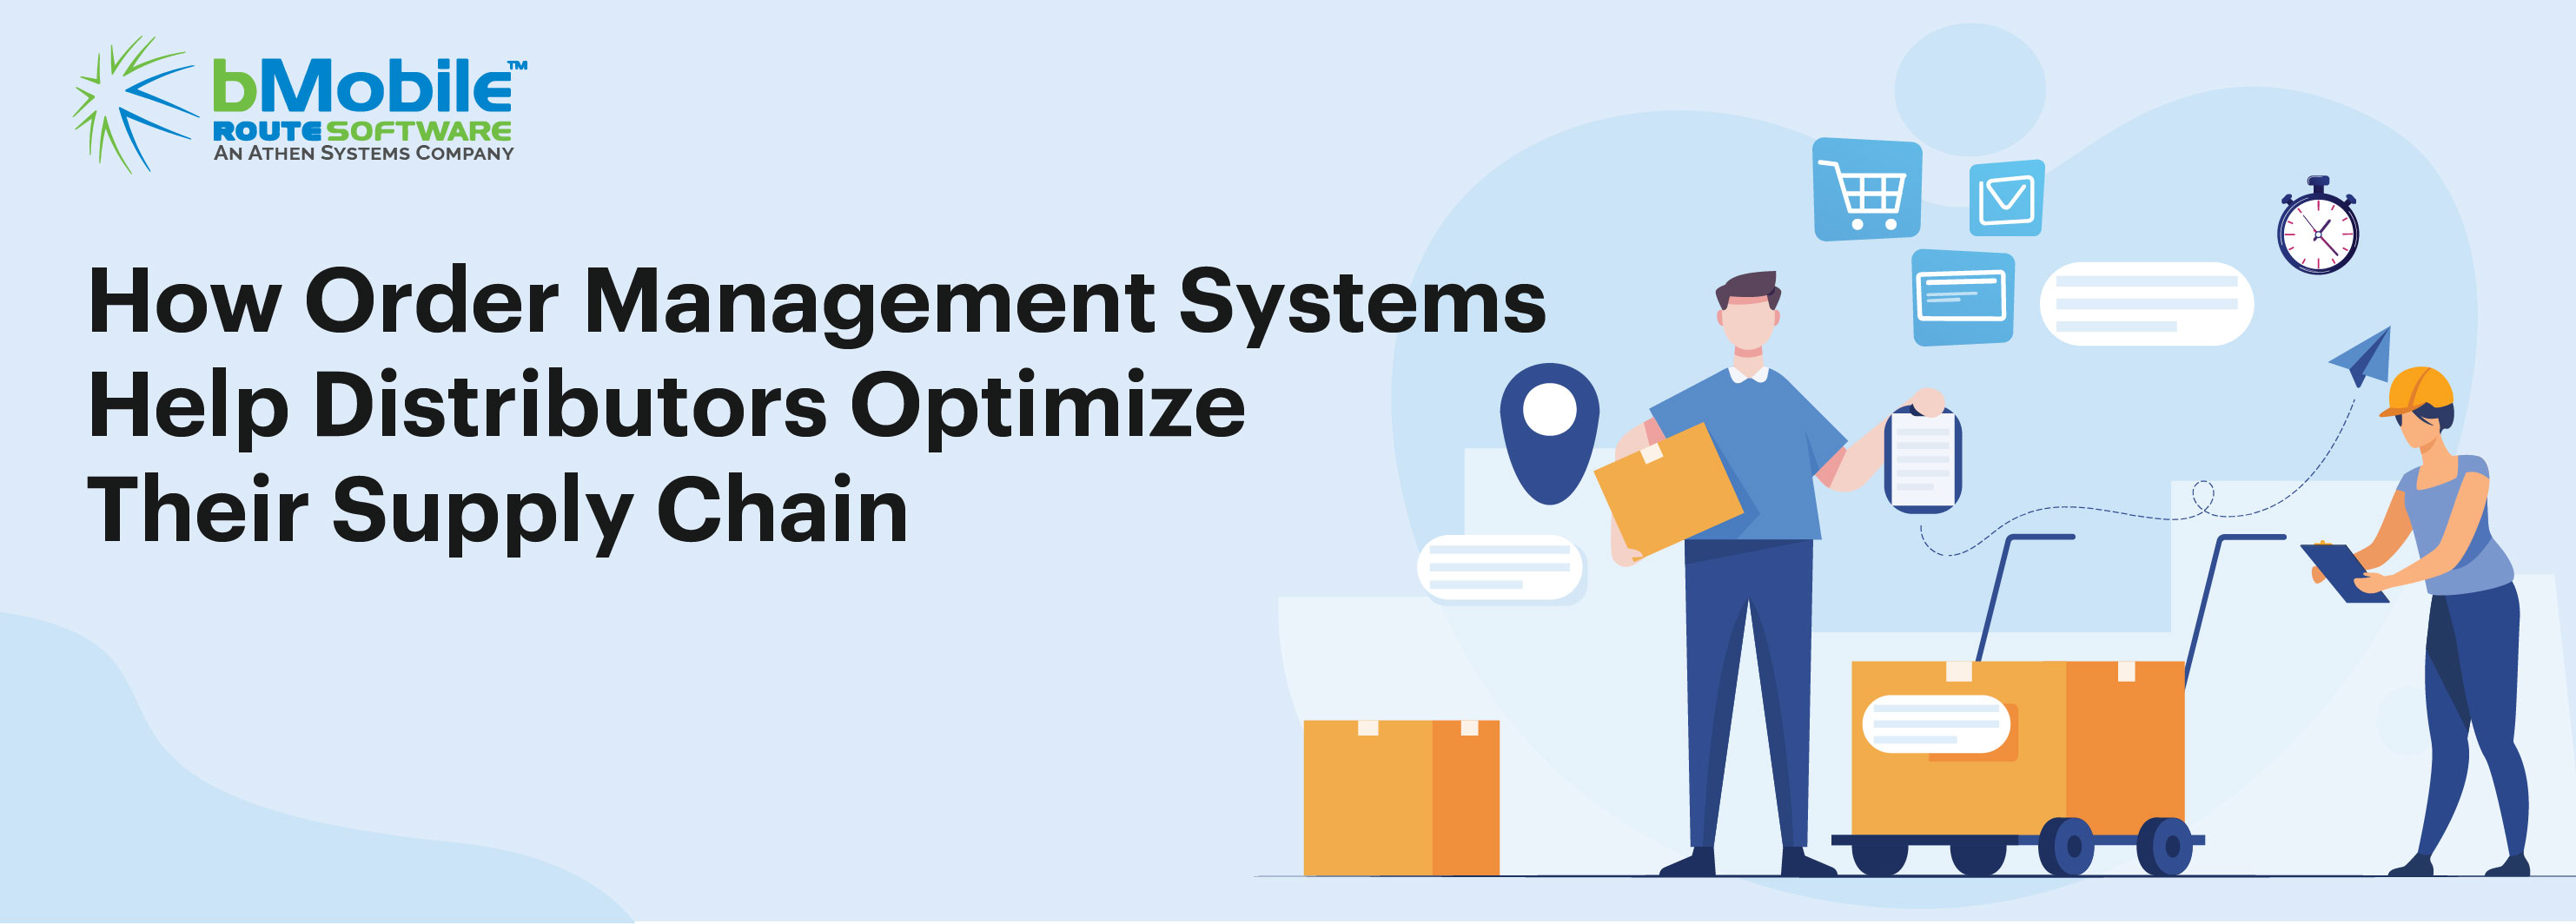 How Order Management Systems Help Distributors Optimize Their Supply Chain